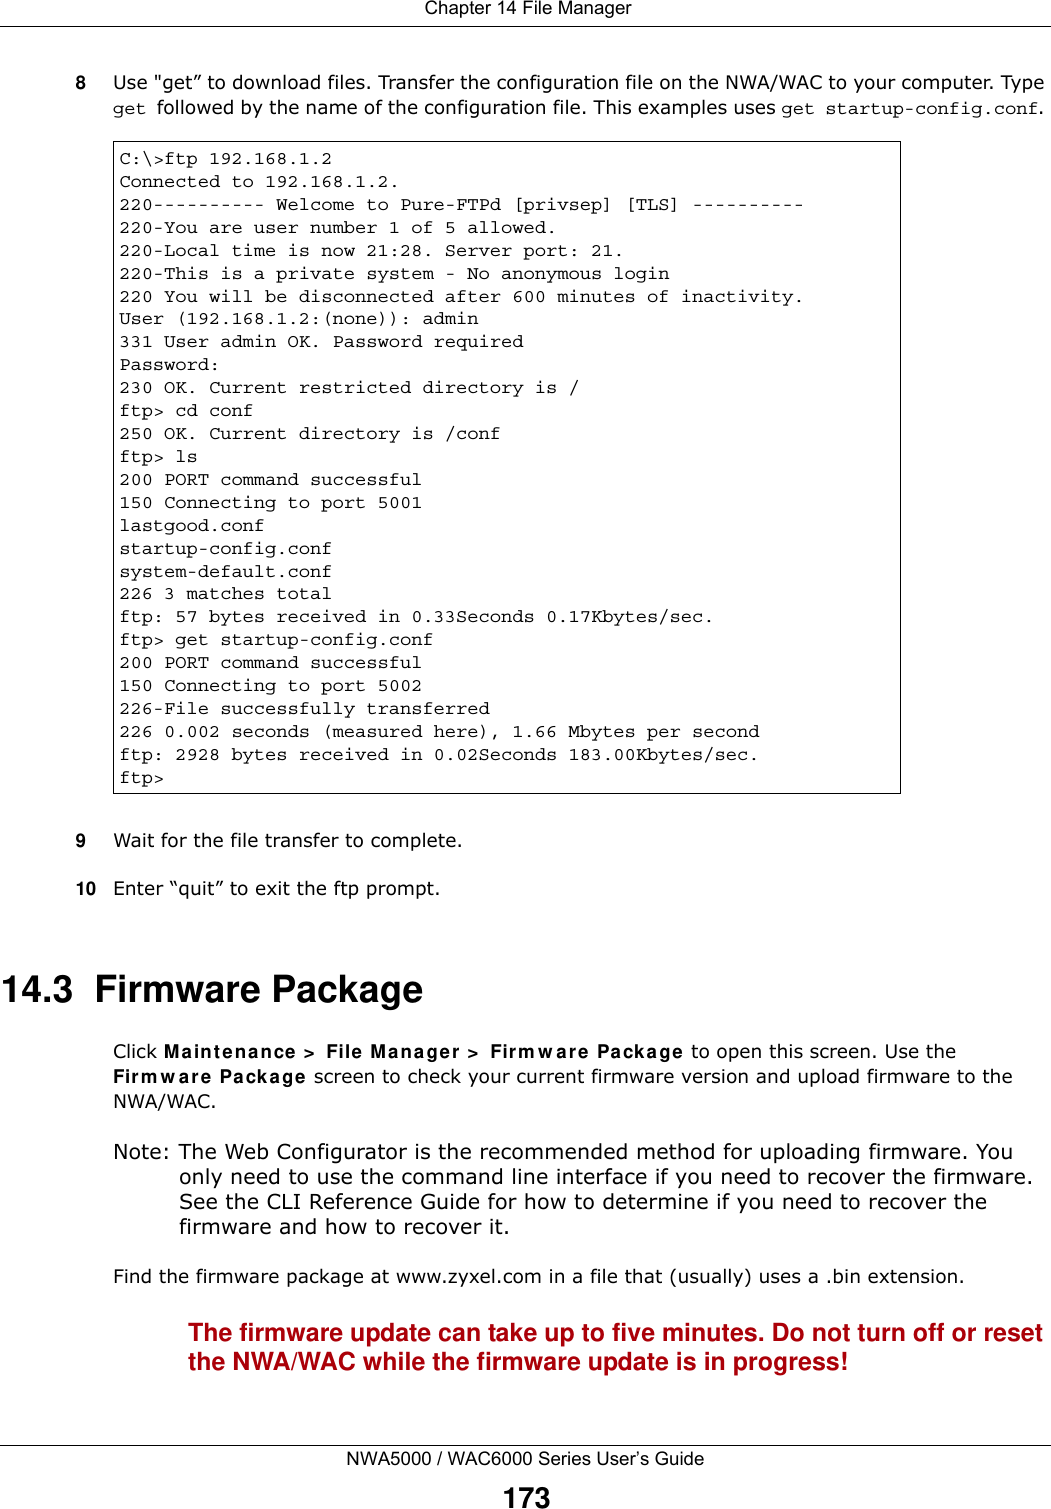  Chapter 14 File ManagerNWA5000 / WAC6000 Series User’s Guide1738Use &quot;get” to download files. Transfer the configuration file on the NWA/WAC to your computer. Type get followed by the name of the configuration file. This examples uses get startup-config.conf. 9Wait for the file transfer to complete.10 Enter “quit” to exit the ftp prompt.14.3  Firmware Package Click M ainte nance  &gt;  File M ana ger &gt;  Firm w are  Packa ge to open this screen. Use the Fir m w a re Pa cka ge screen to check your current firmware version and upload firmware to the NWA/WAC.Note: The Web Configurator is the recommended method for uploading firmware. You only need to use the command line interface if you need to recover the firmware. See the CLI Reference Guide for how to determine if you need to recover the firmware and how to recover it.Find the firmware package at www.zyxel.com in a file that (usually) uses a .bin extension. The firmware update can take up to five minutes. Do not turn off or reset the NWA/WAC while the firmware update is in progress!C:\&gt;ftp 192.168.1.2Connected to 192.168.1.2.220---------- Welcome to Pure-FTPd [privsep] [TLS] ----------220-You are user number 1 of 5 allowed.220-Local time is now 21:28. Server port: 21.220-This is a private system - No anonymous login220 You will be disconnected after 600 minutes of inactivity.User (192.168.1.2:(none)): admin331 User admin OK. Password requiredPassword:230 OK. Current restricted directory is /ftp&gt; cd conf250 OK. Current directory is /confftp&gt; ls200 PORT command successful150 Connecting to port 5001lastgood.confstartup-config.confsystem-default.conf226 3 matches totalftp: 57 bytes received in 0.33Seconds 0.17Kbytes/sec.ftp&gt; get startup-config.conf200 PORT command successful150 Connecting to port 5002226-File successfully transferred226 0.002 seconds (measured here), 1.66 Mbytes per secondftp: 2928 bytes received in 0.02Seconds 183.00Kbytes/sec.ftp&gt;